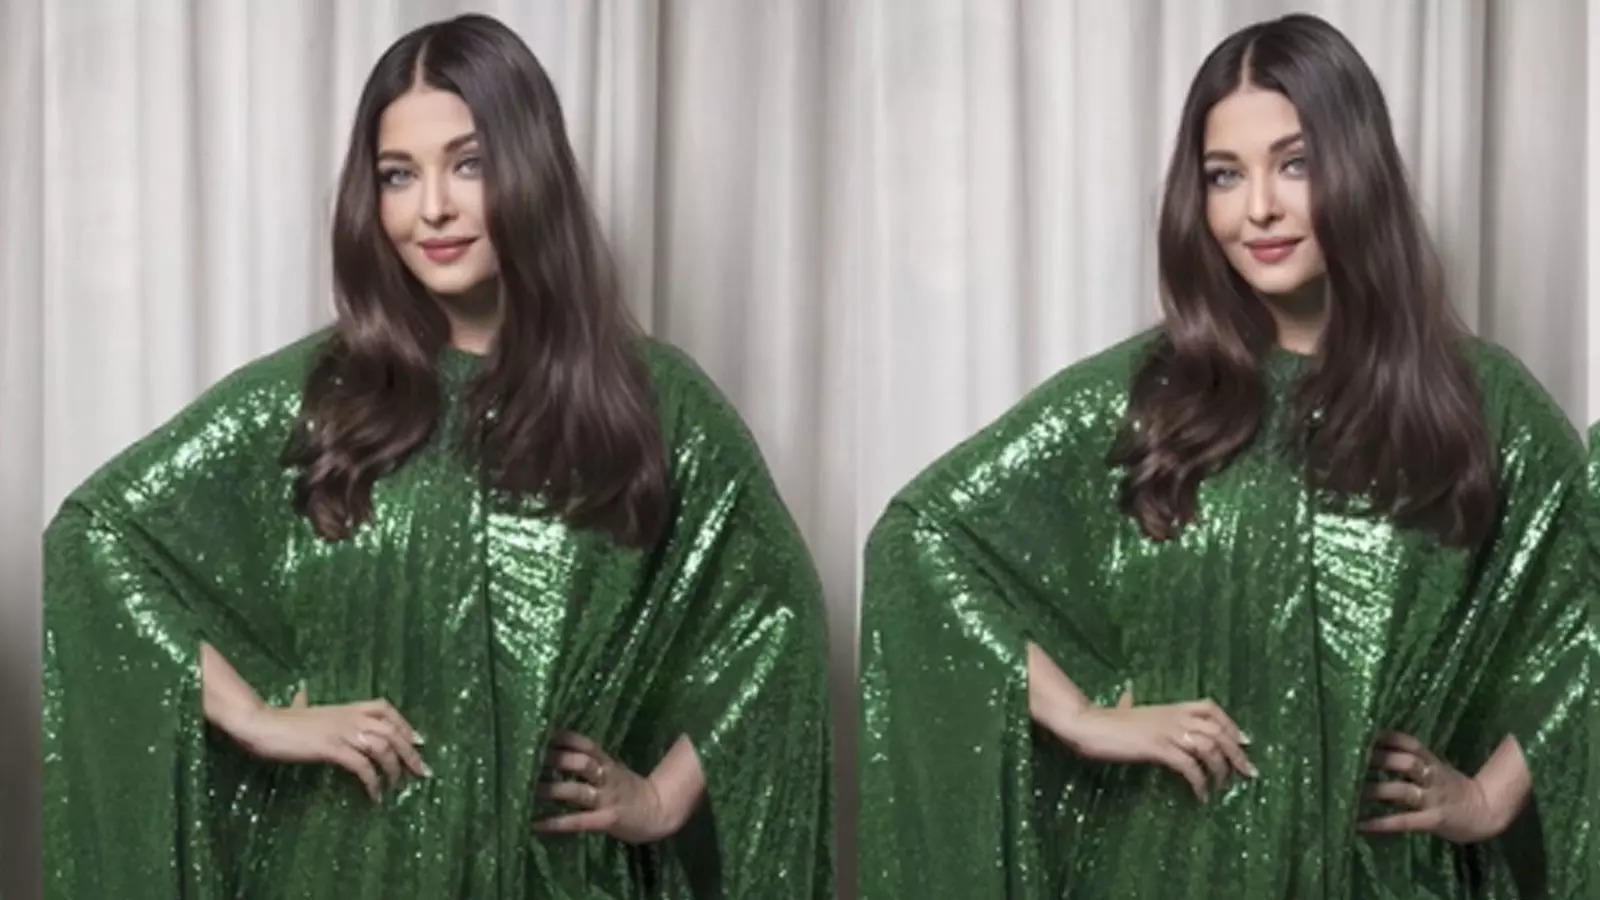 Aishwarya Rai Bachchan makes her first appearance at Cannes 2023 in a green kaftaan; netizens compare her outfit with ‘Paan’ | Hindi Movie News – Bollywood